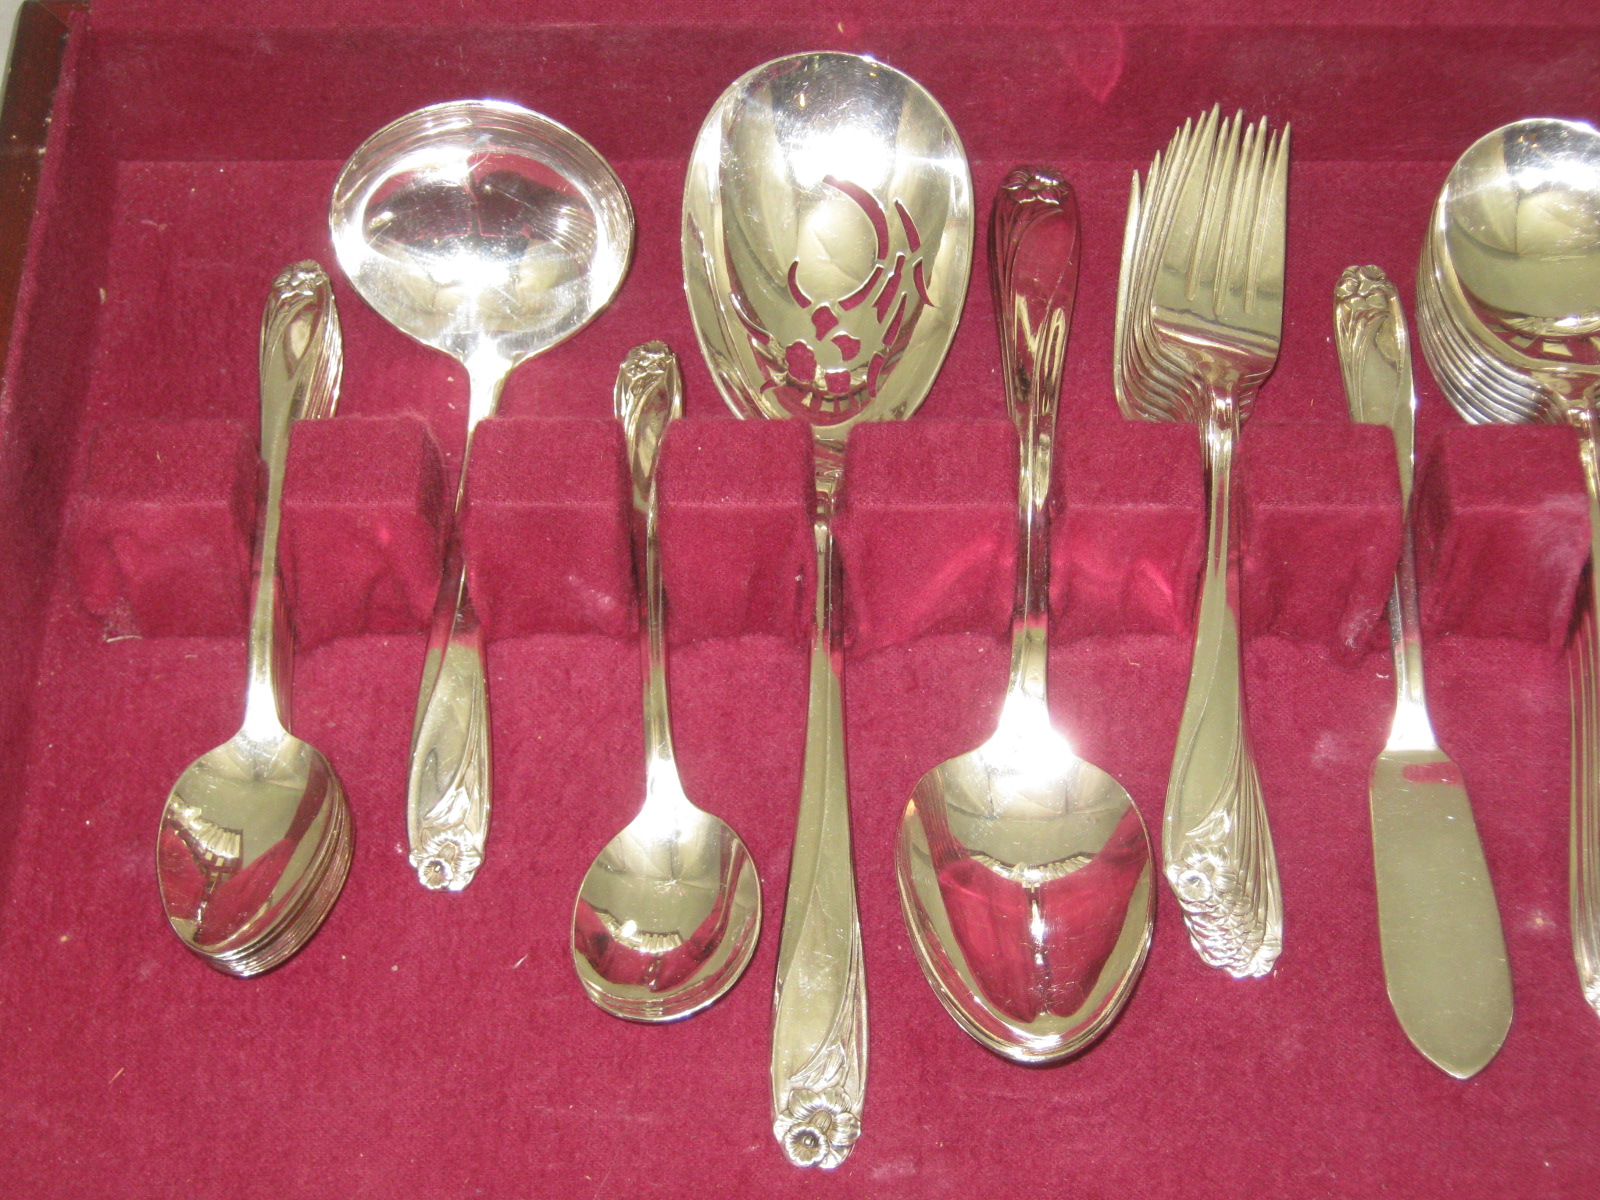 57 Pc 1847 Rogers Bros IS Daffodil Pattern Flatware Service For 8 + Wooden Chest 1